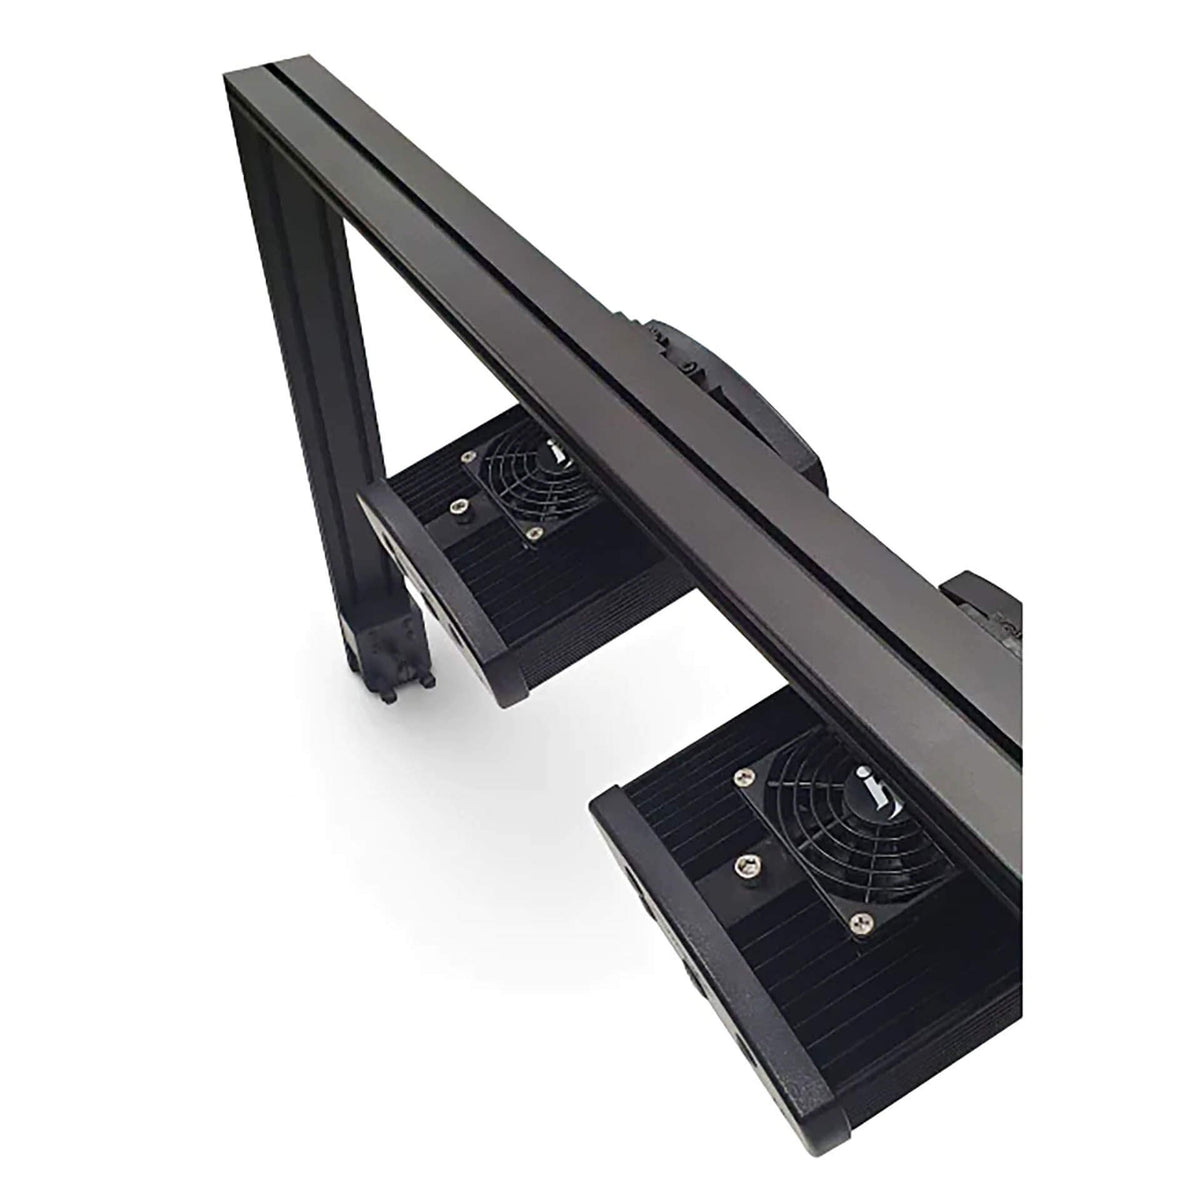 Illumagic 180cm Rail Only Mounting System** - Special Order Item